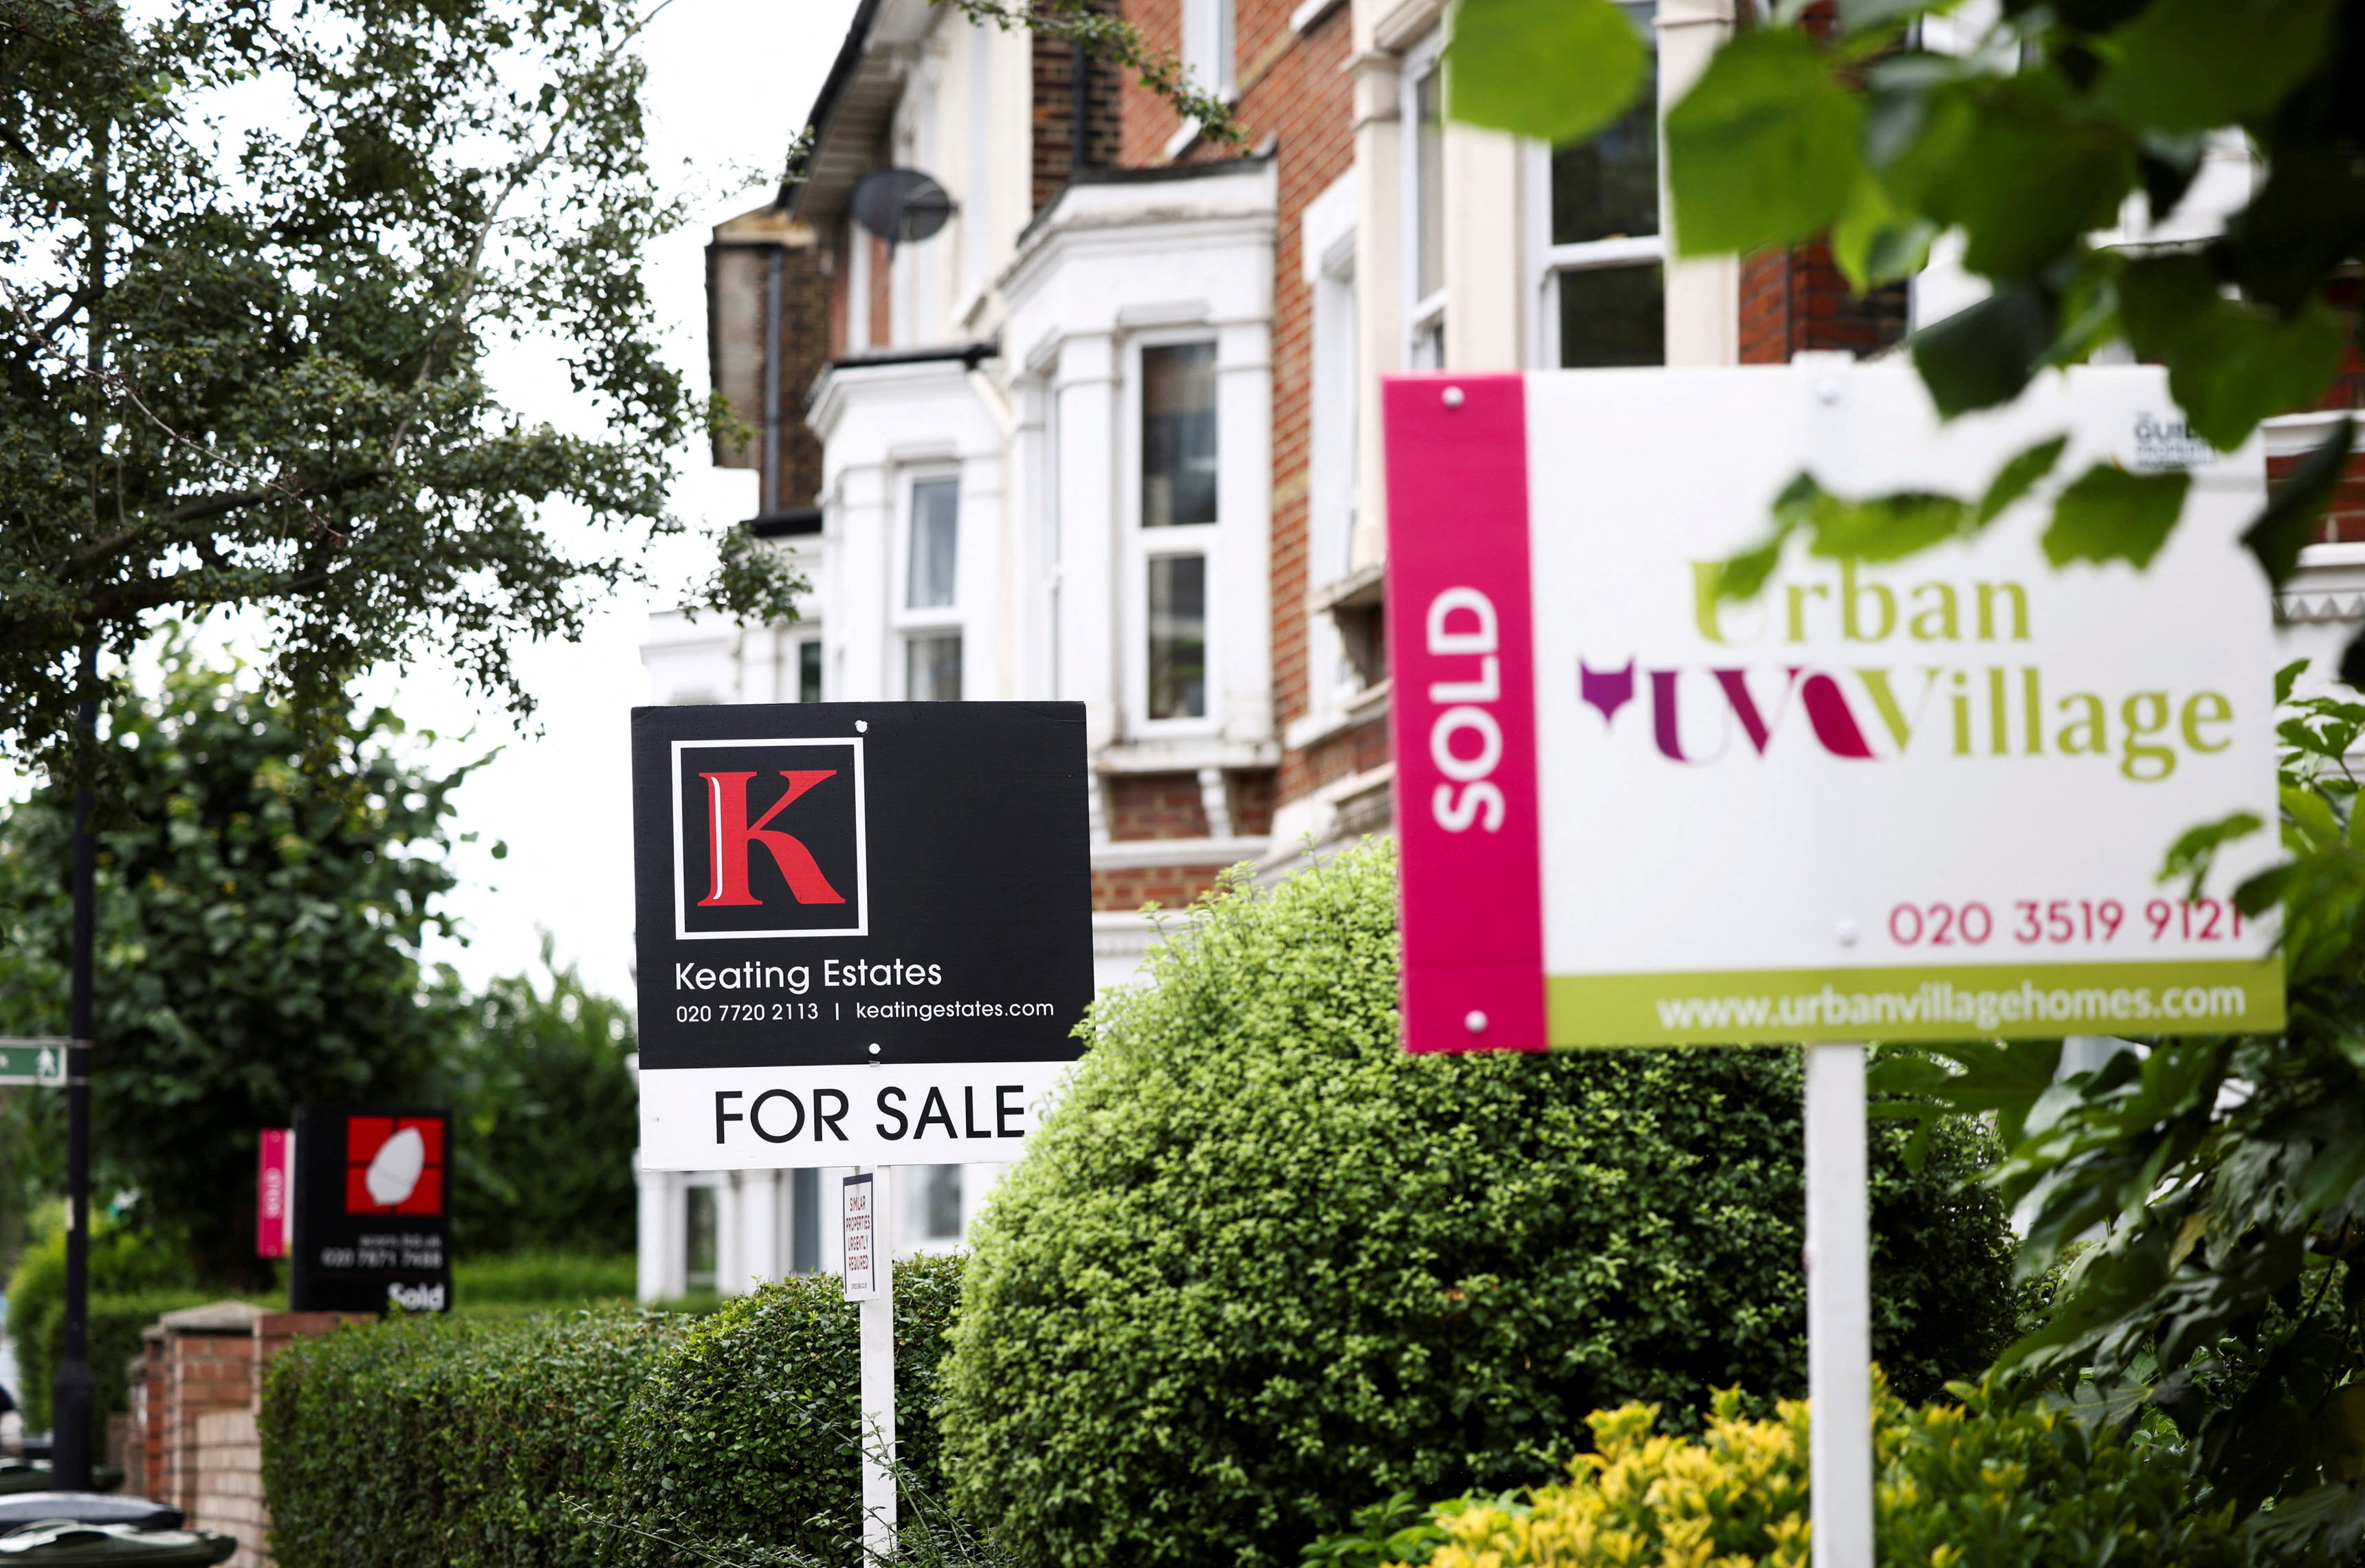 Estate agent signs are seen outside a residential housing in south London